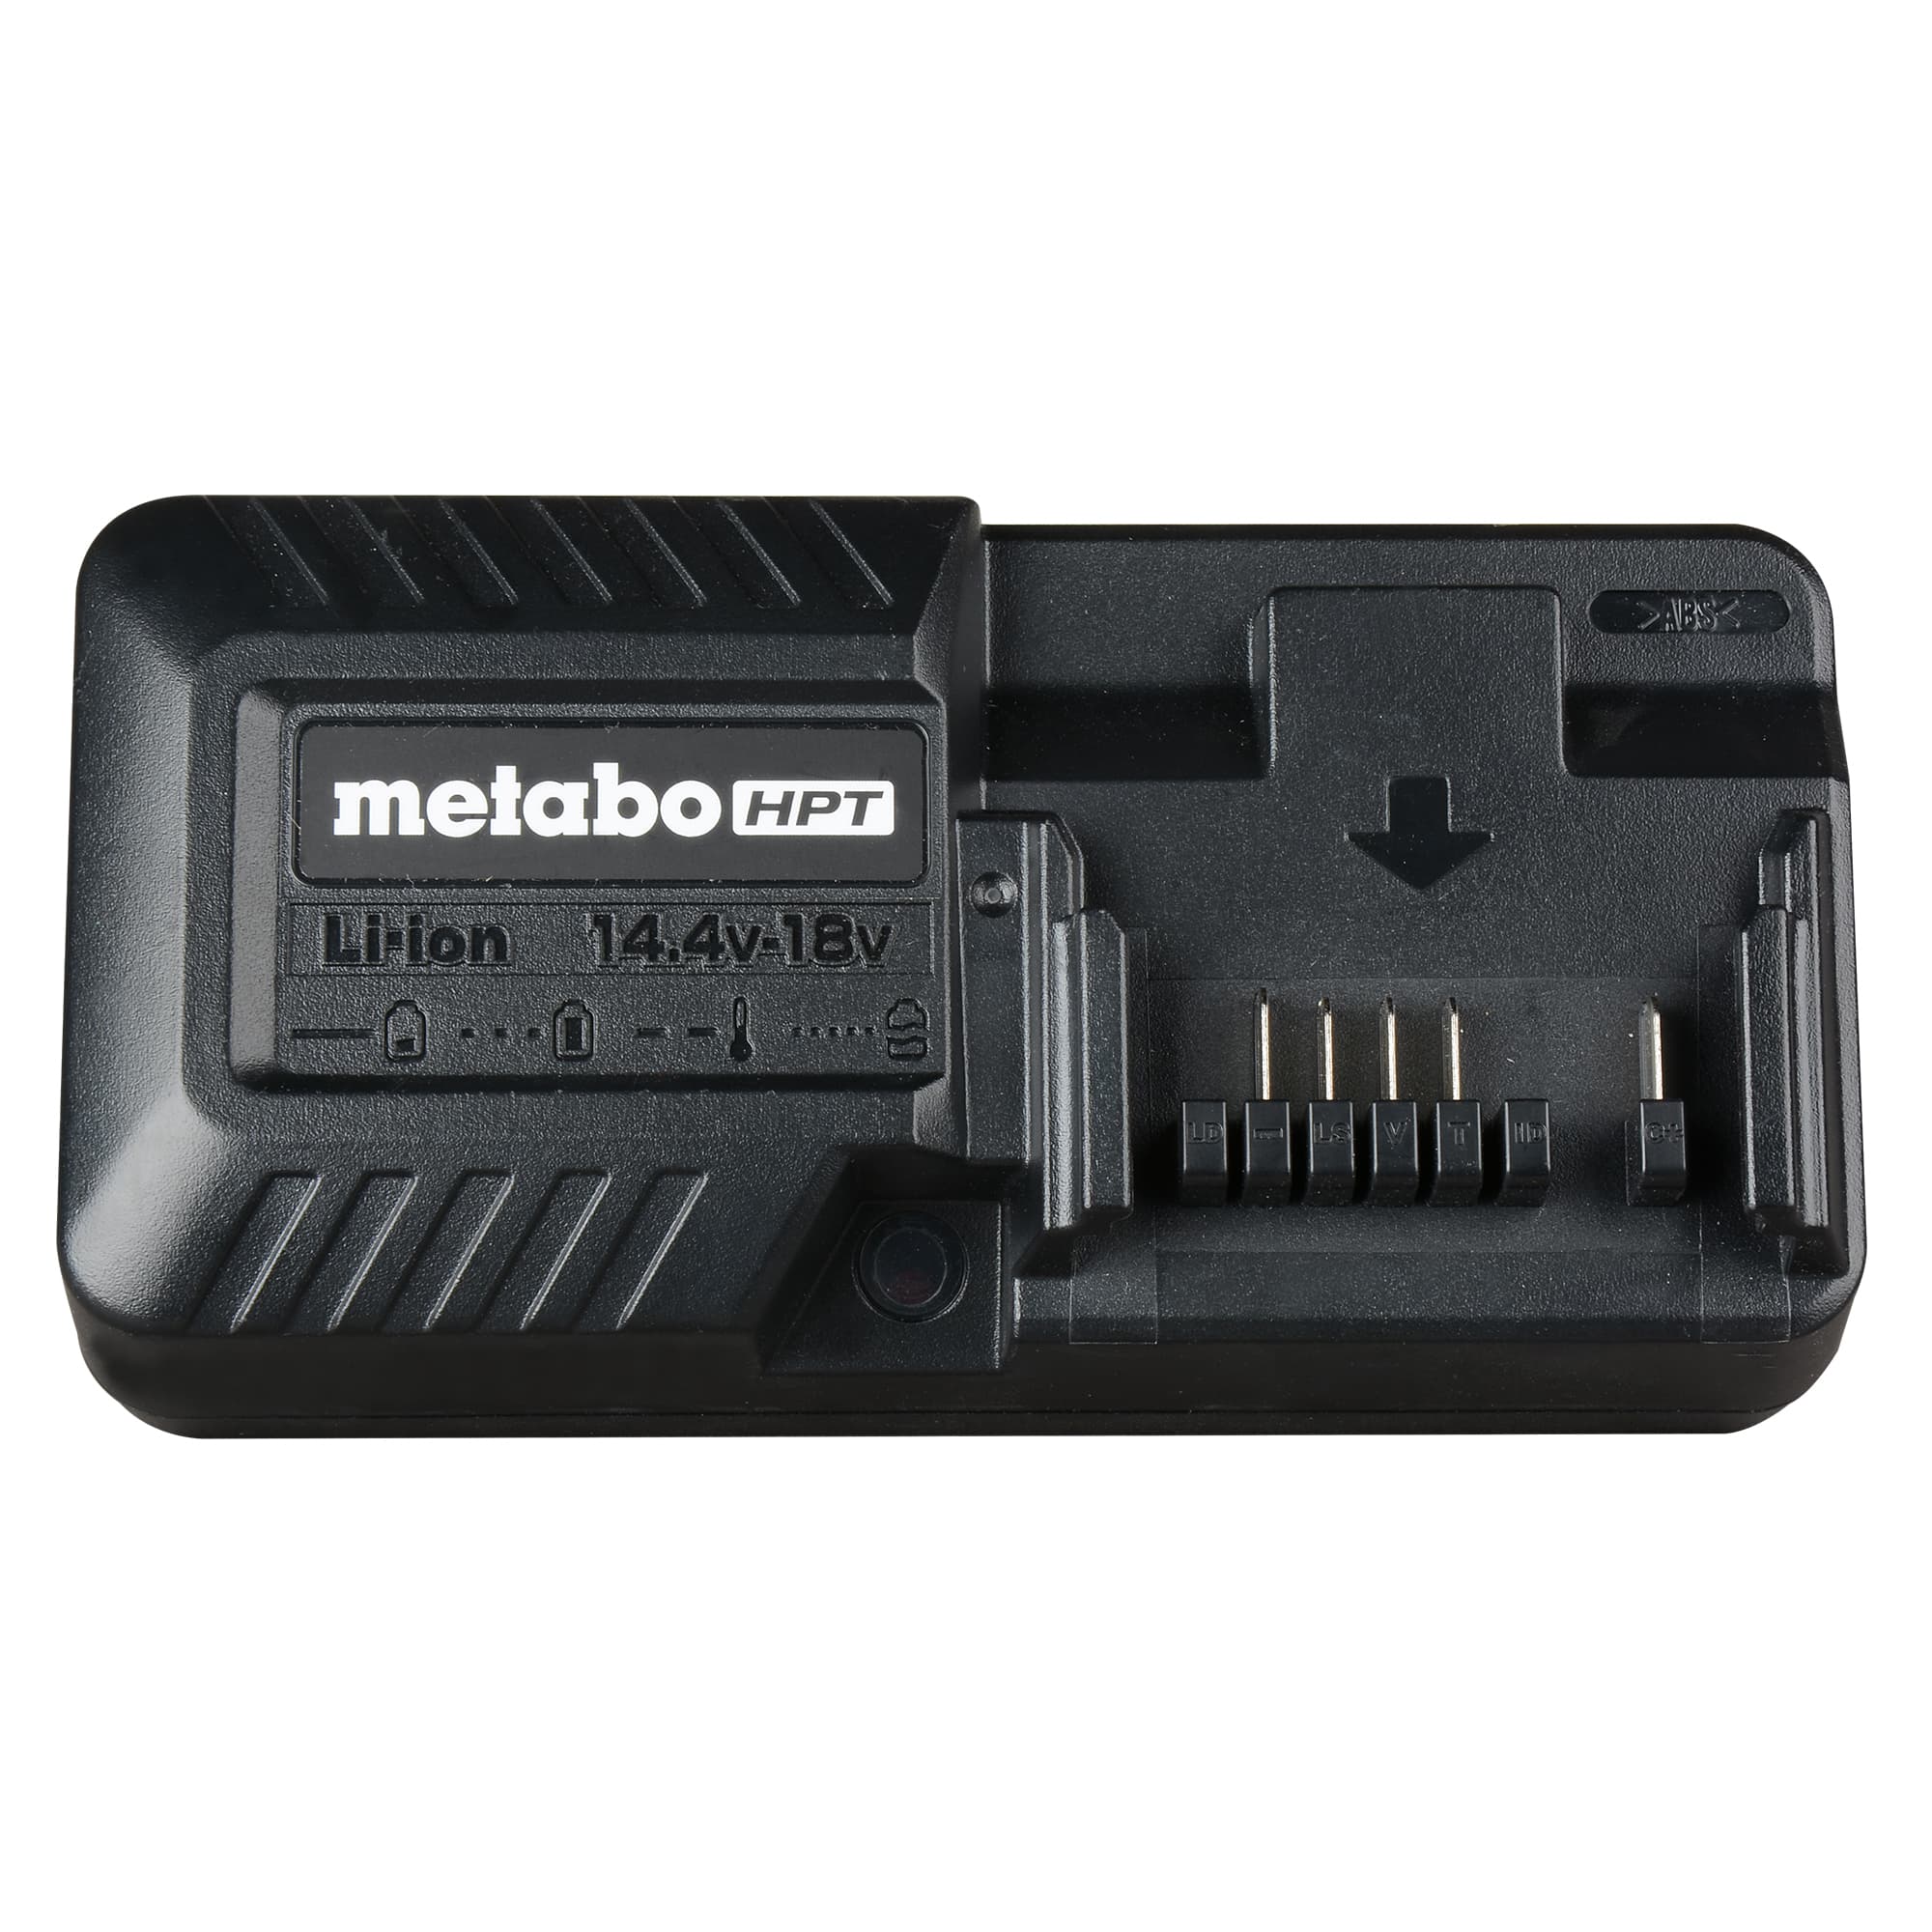 Metabo HPT UC18YKSLSM 18V Lithium Ion 2.0Ah Batteries w/Charge Indicators/Charge Kit